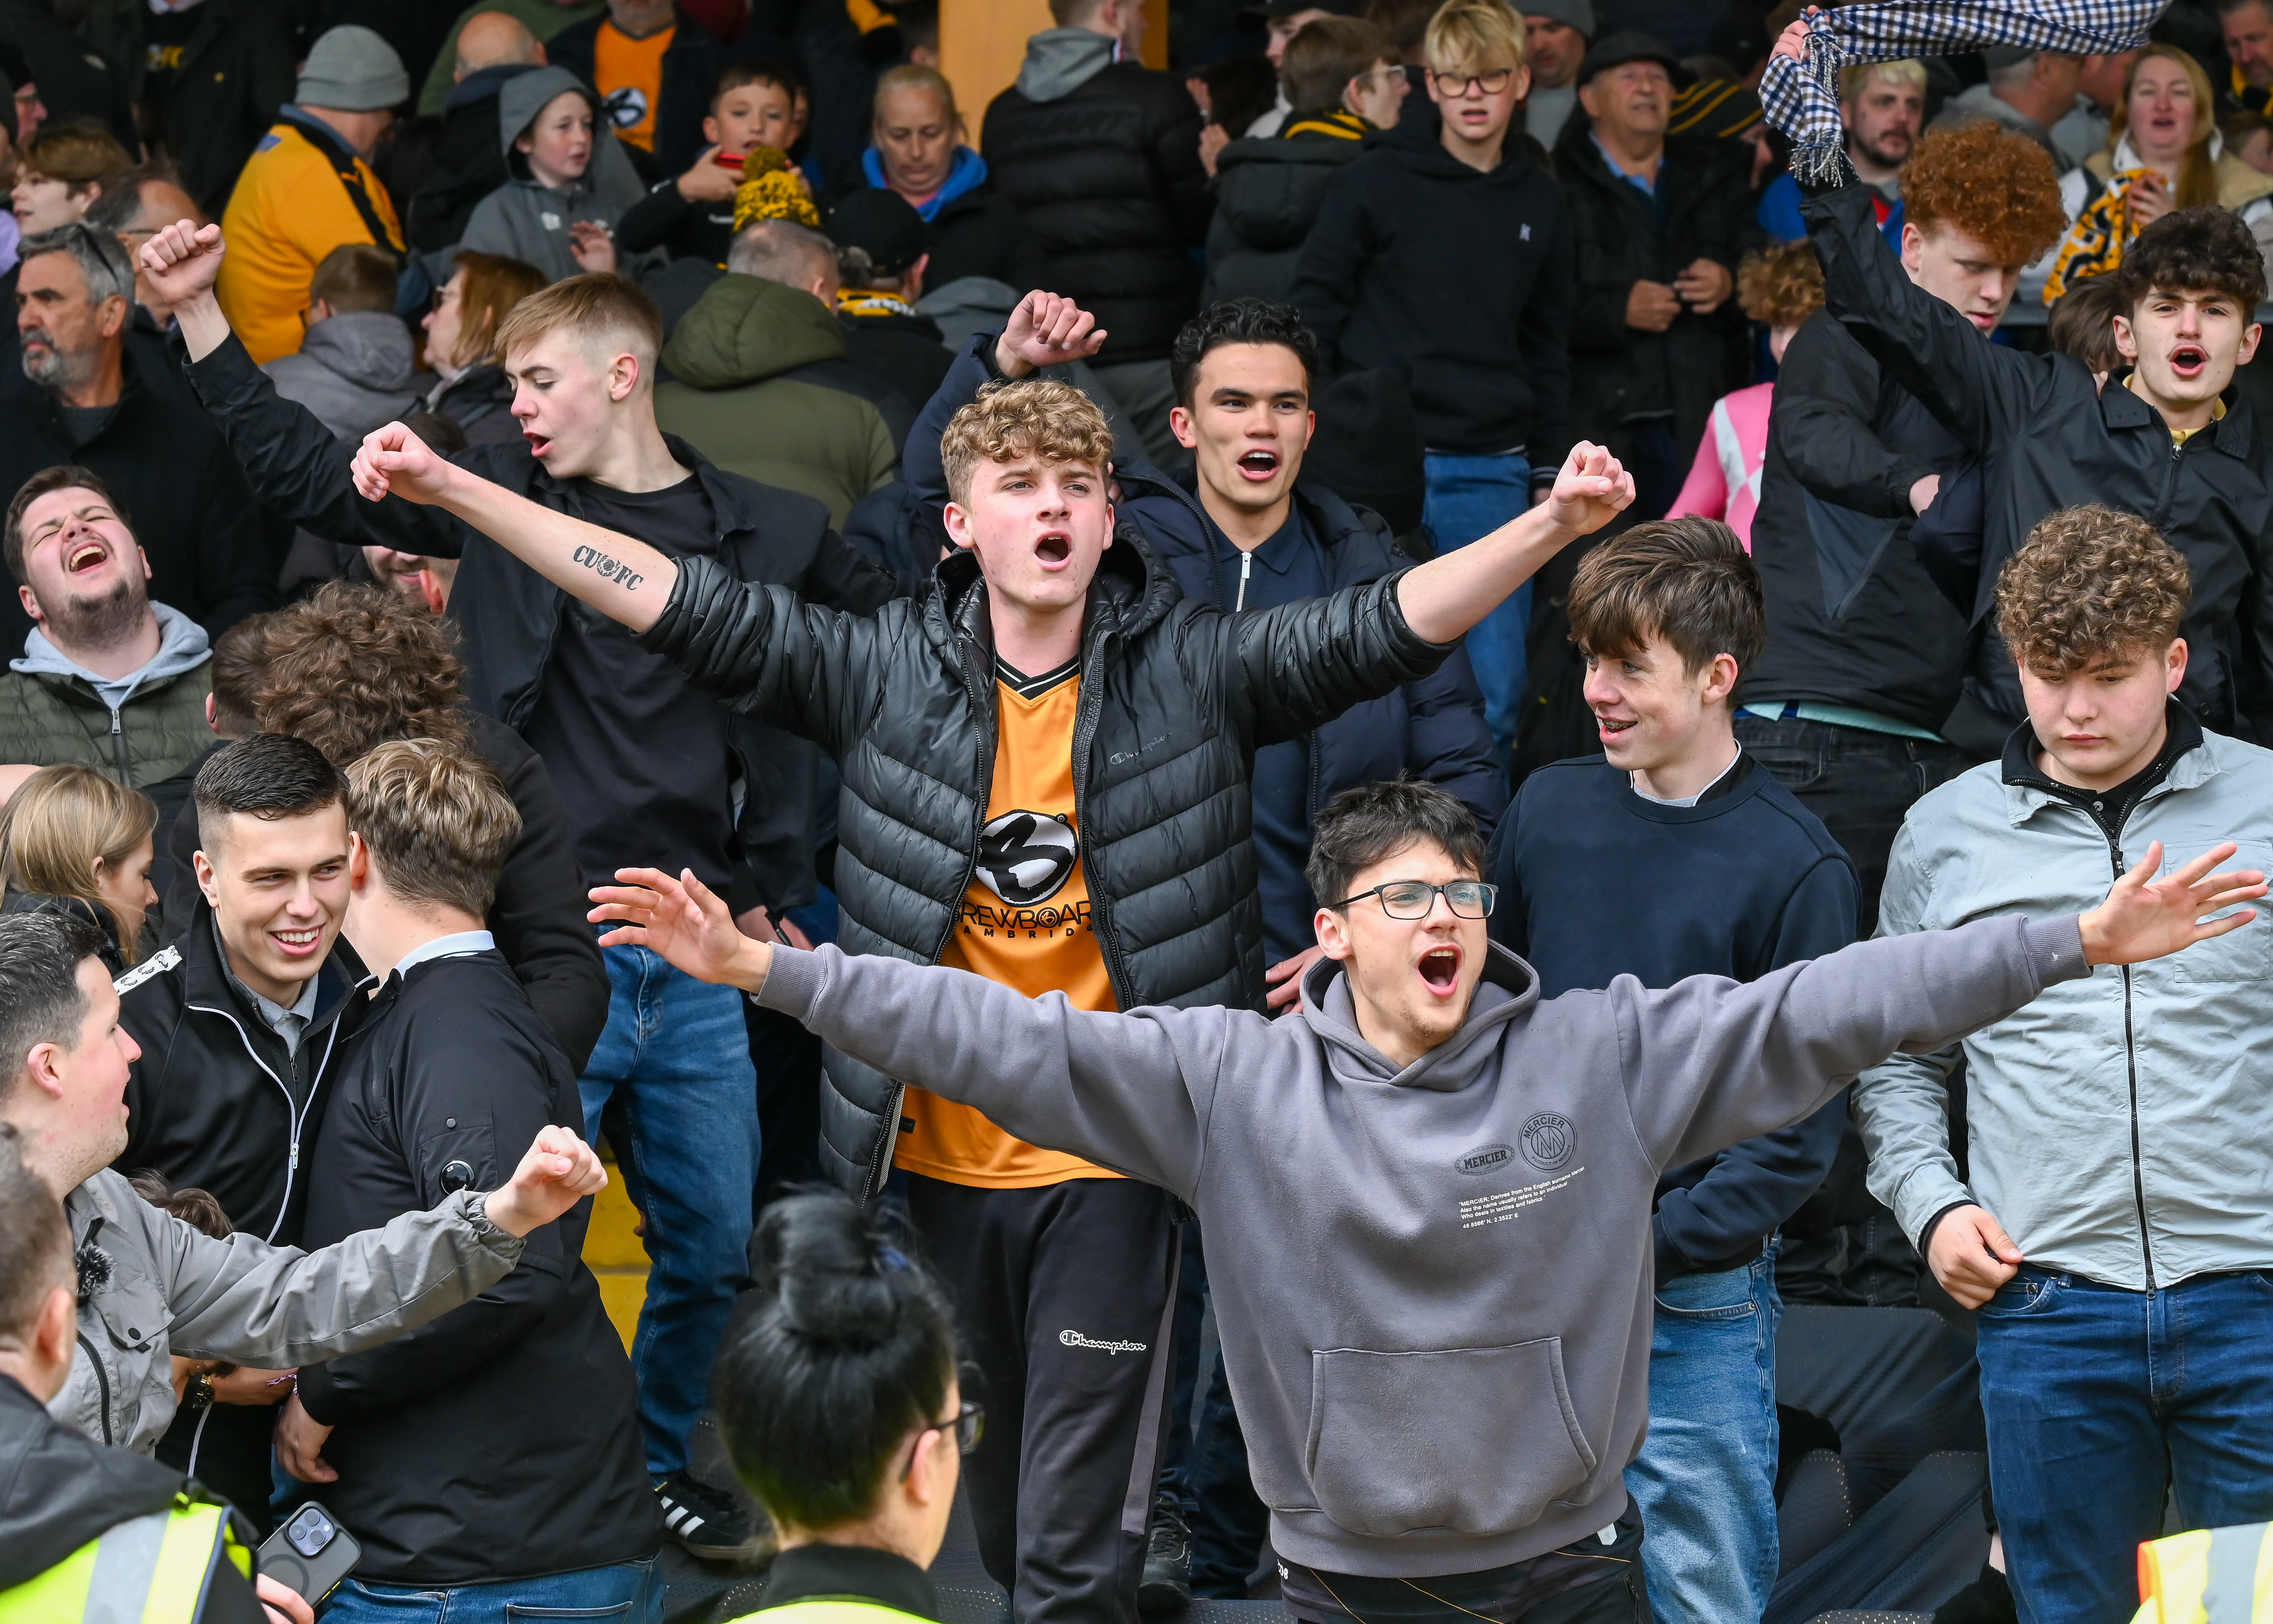 U's fans celebrating in the stands